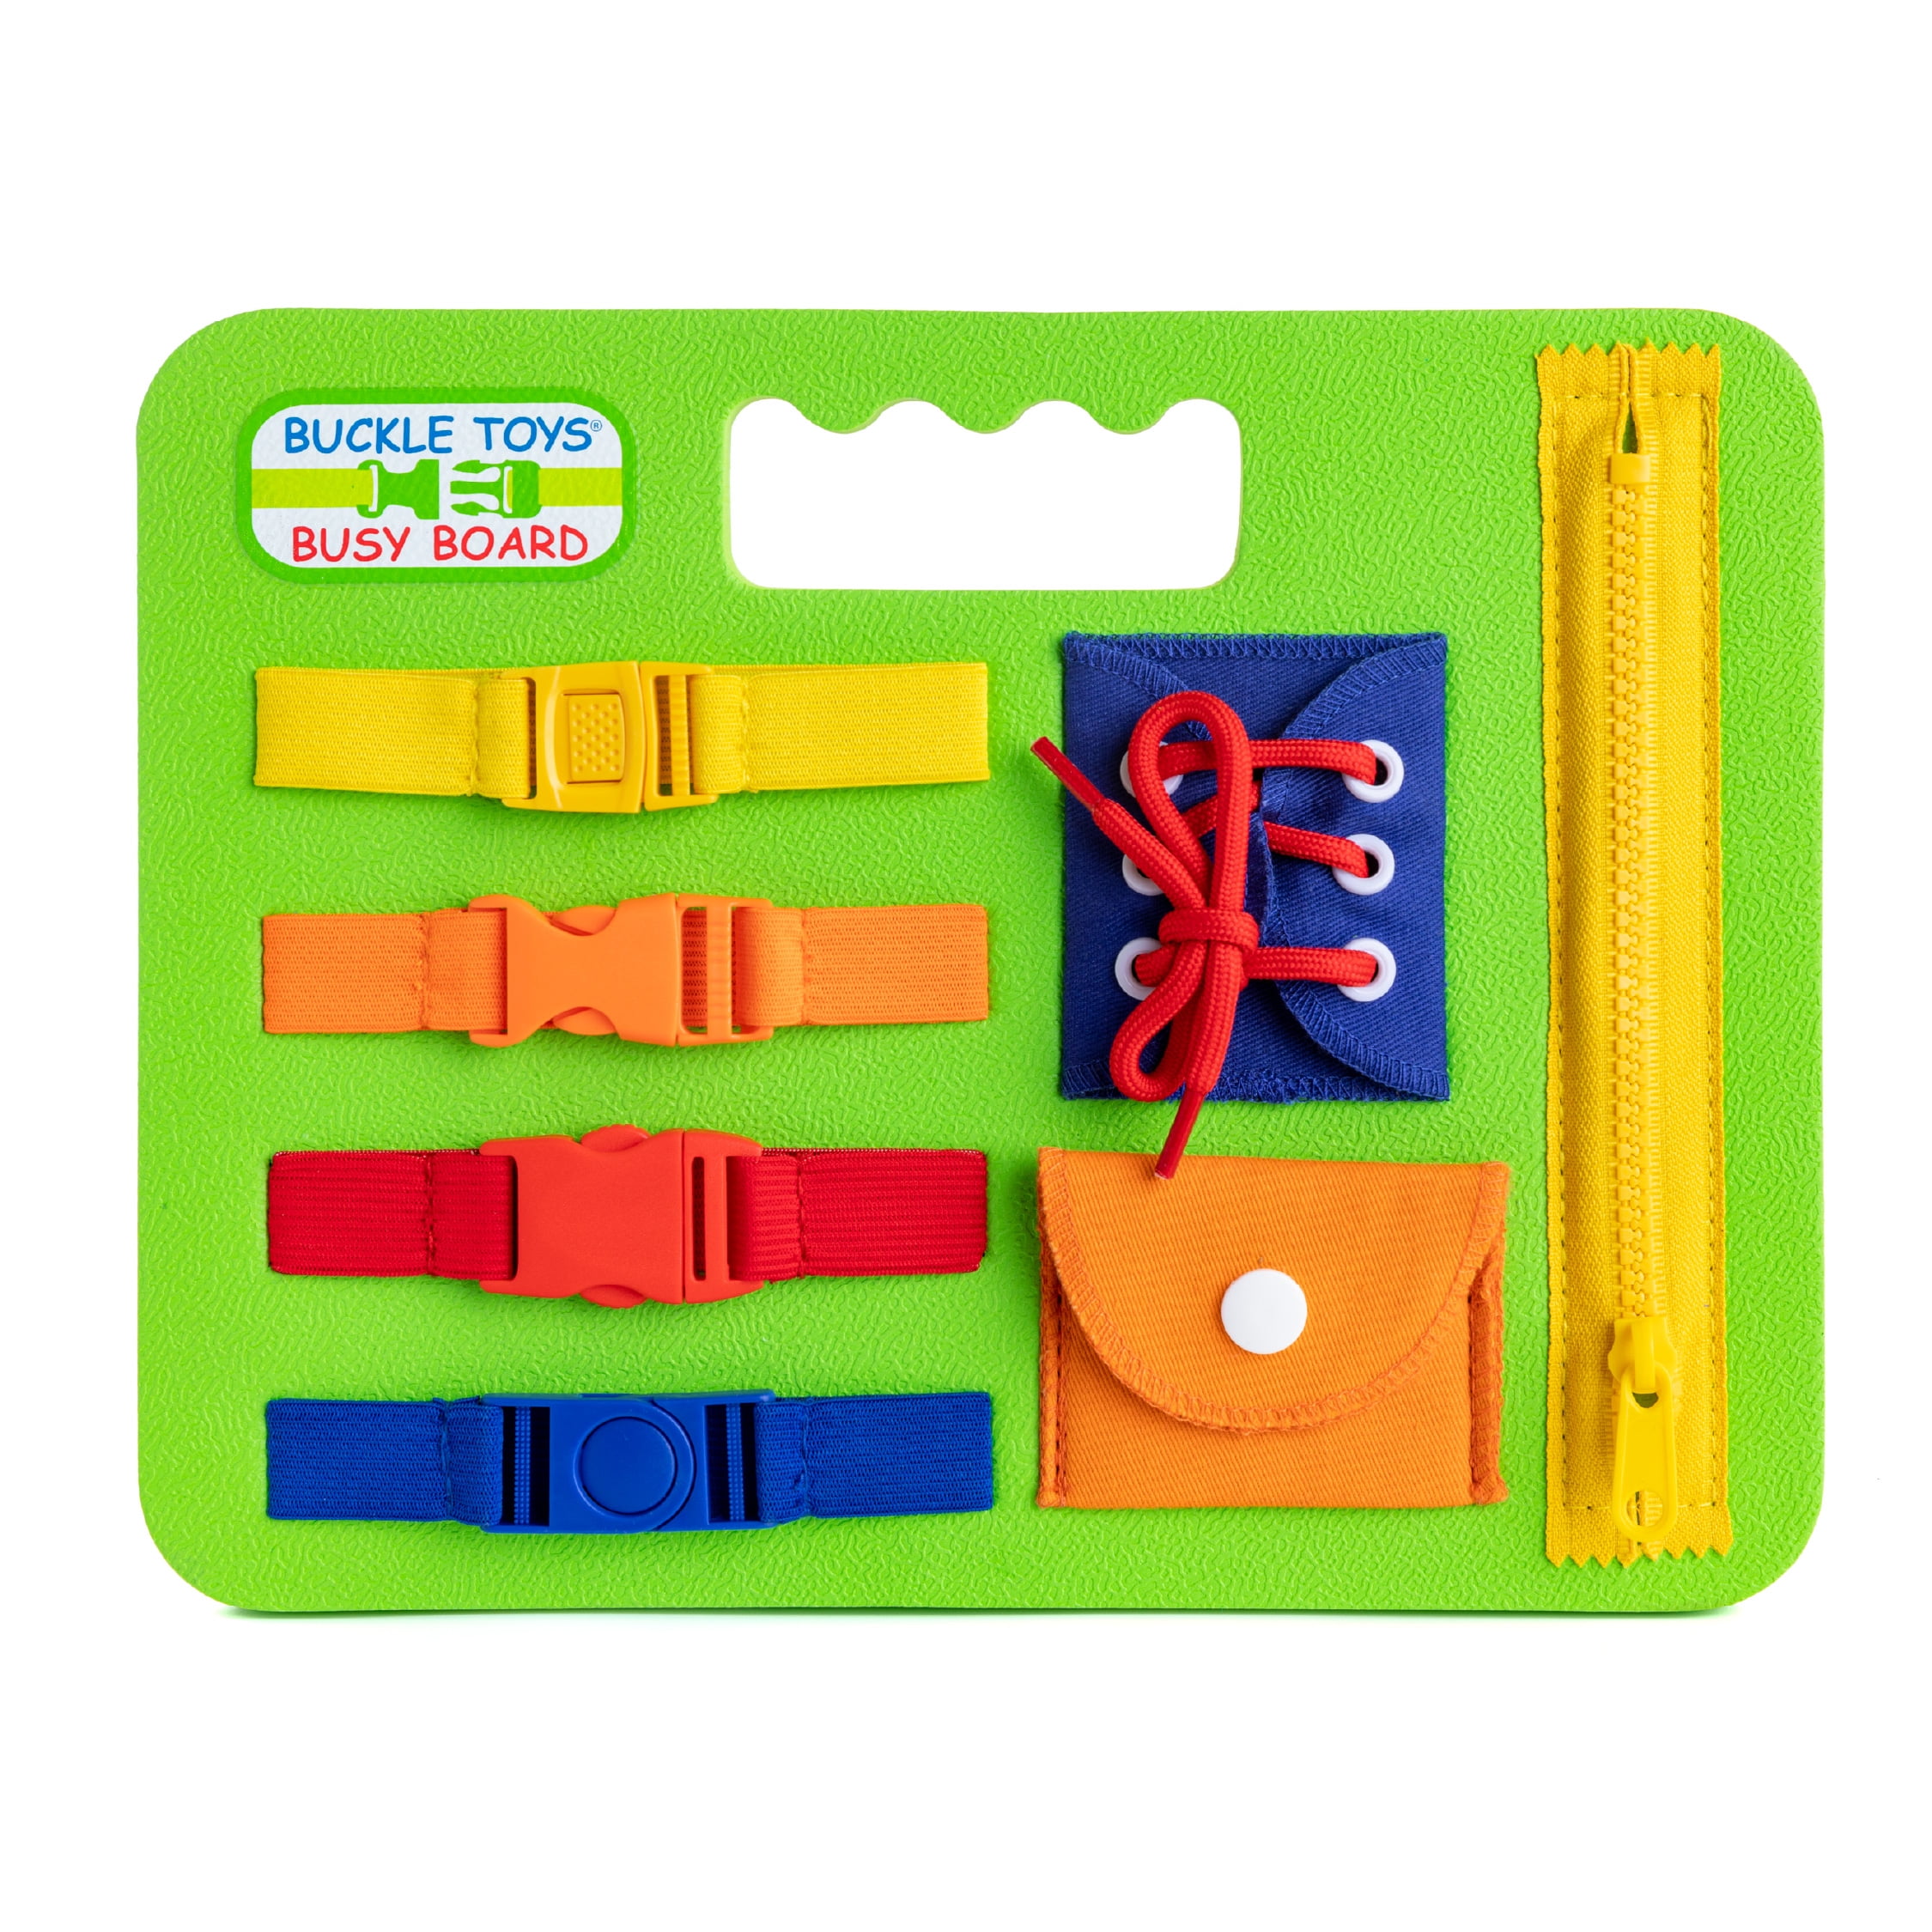 Dress Board Cloth Book For Zip Snap Button Buckle Lace Child Early Learning Toy 